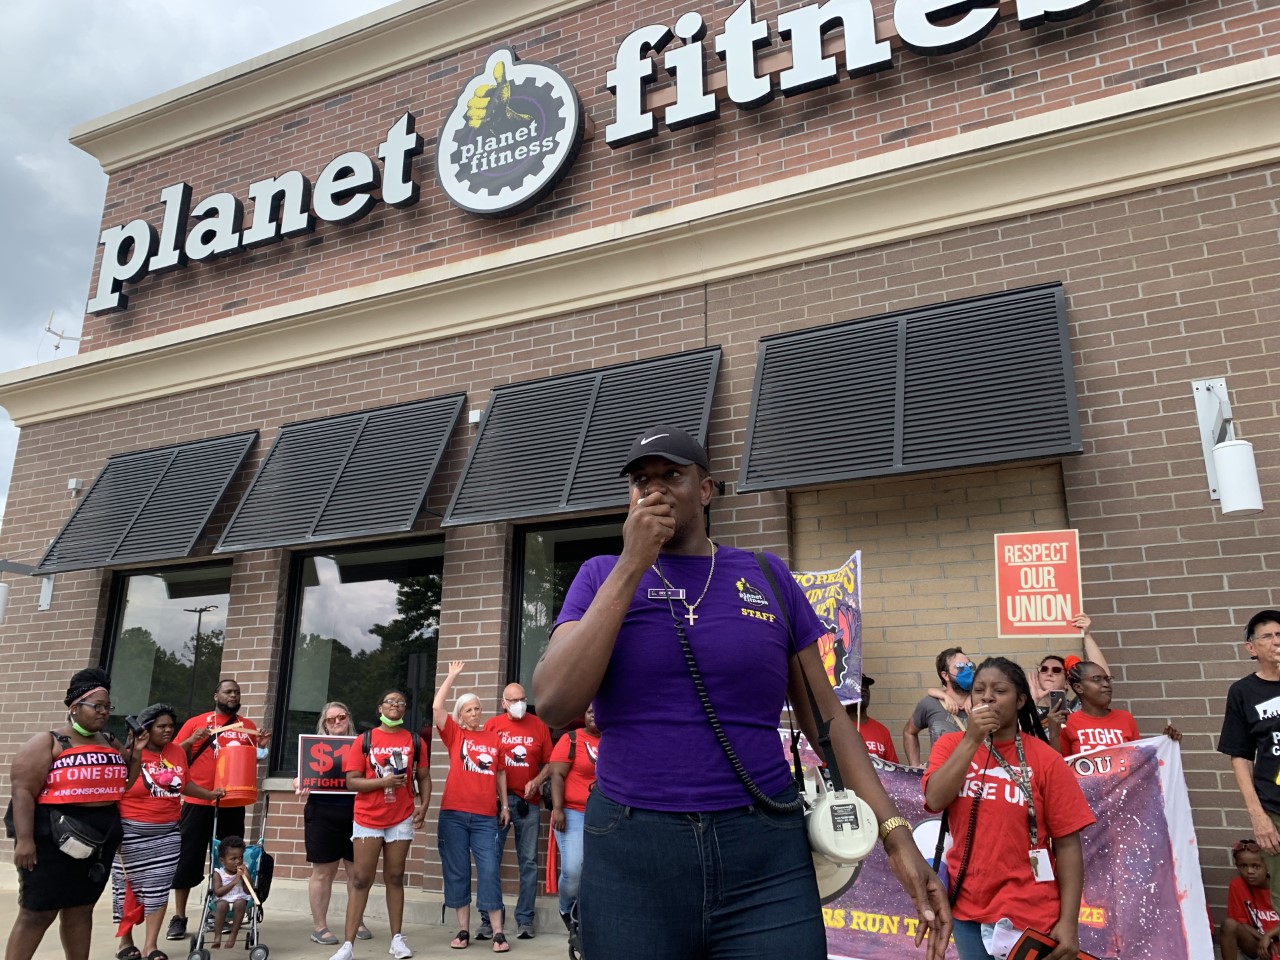 Planet Fitness workers strike: “Stand up, speak out, fight back